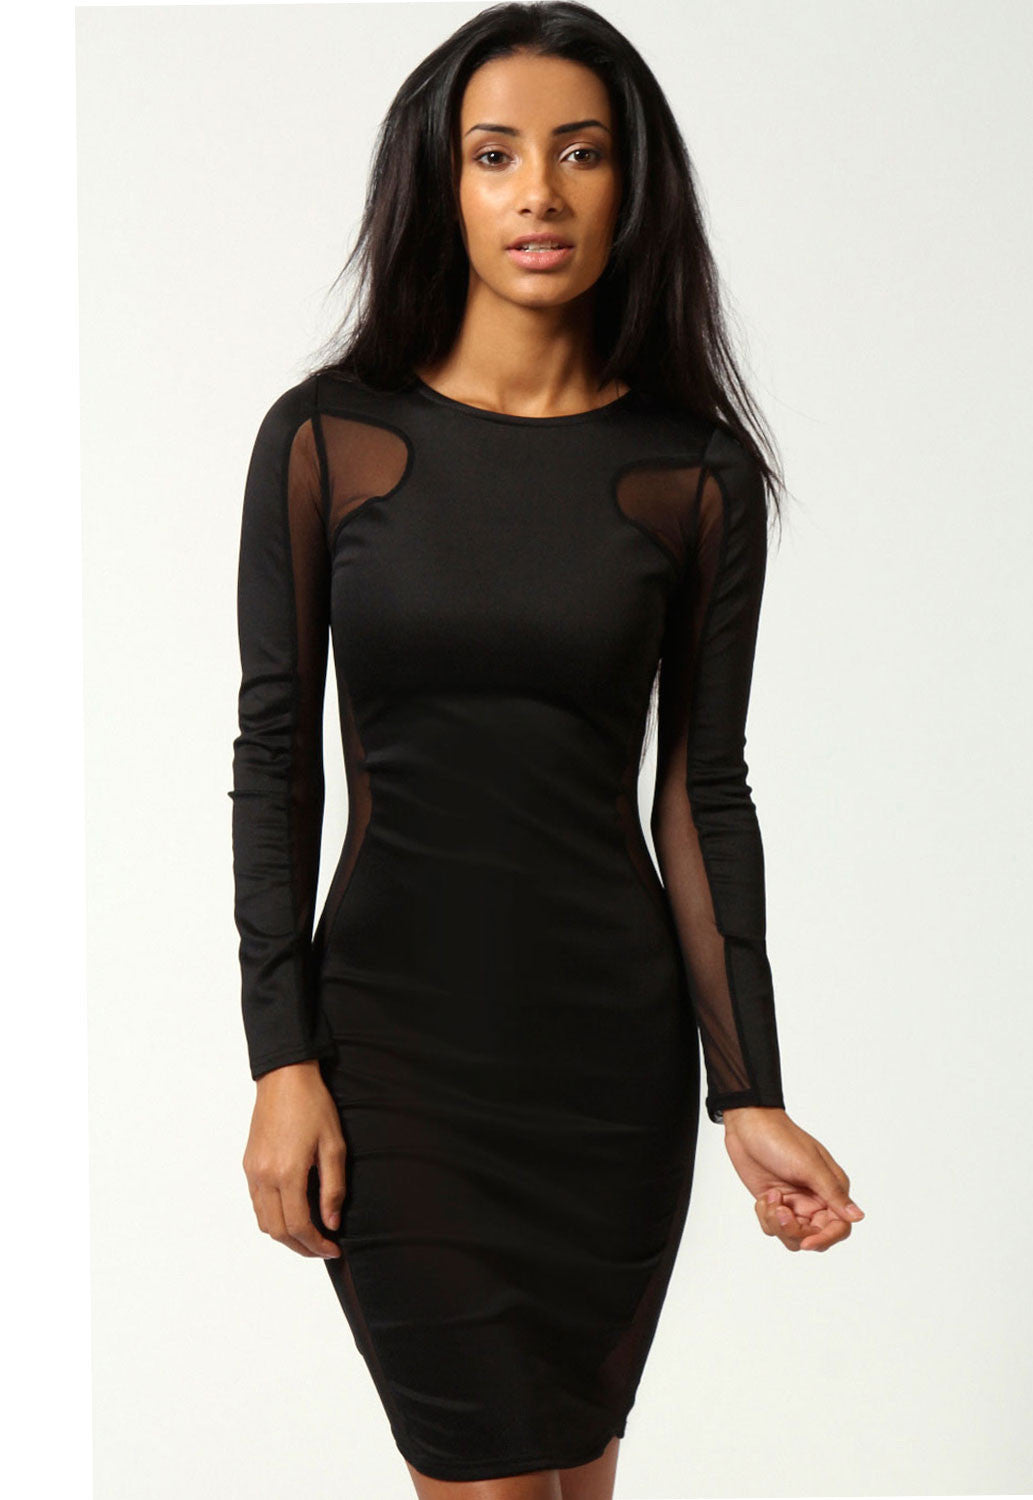 Black and Nude Lace Bodycon Dress, Sexy Black Lace Dress Lily Boutique